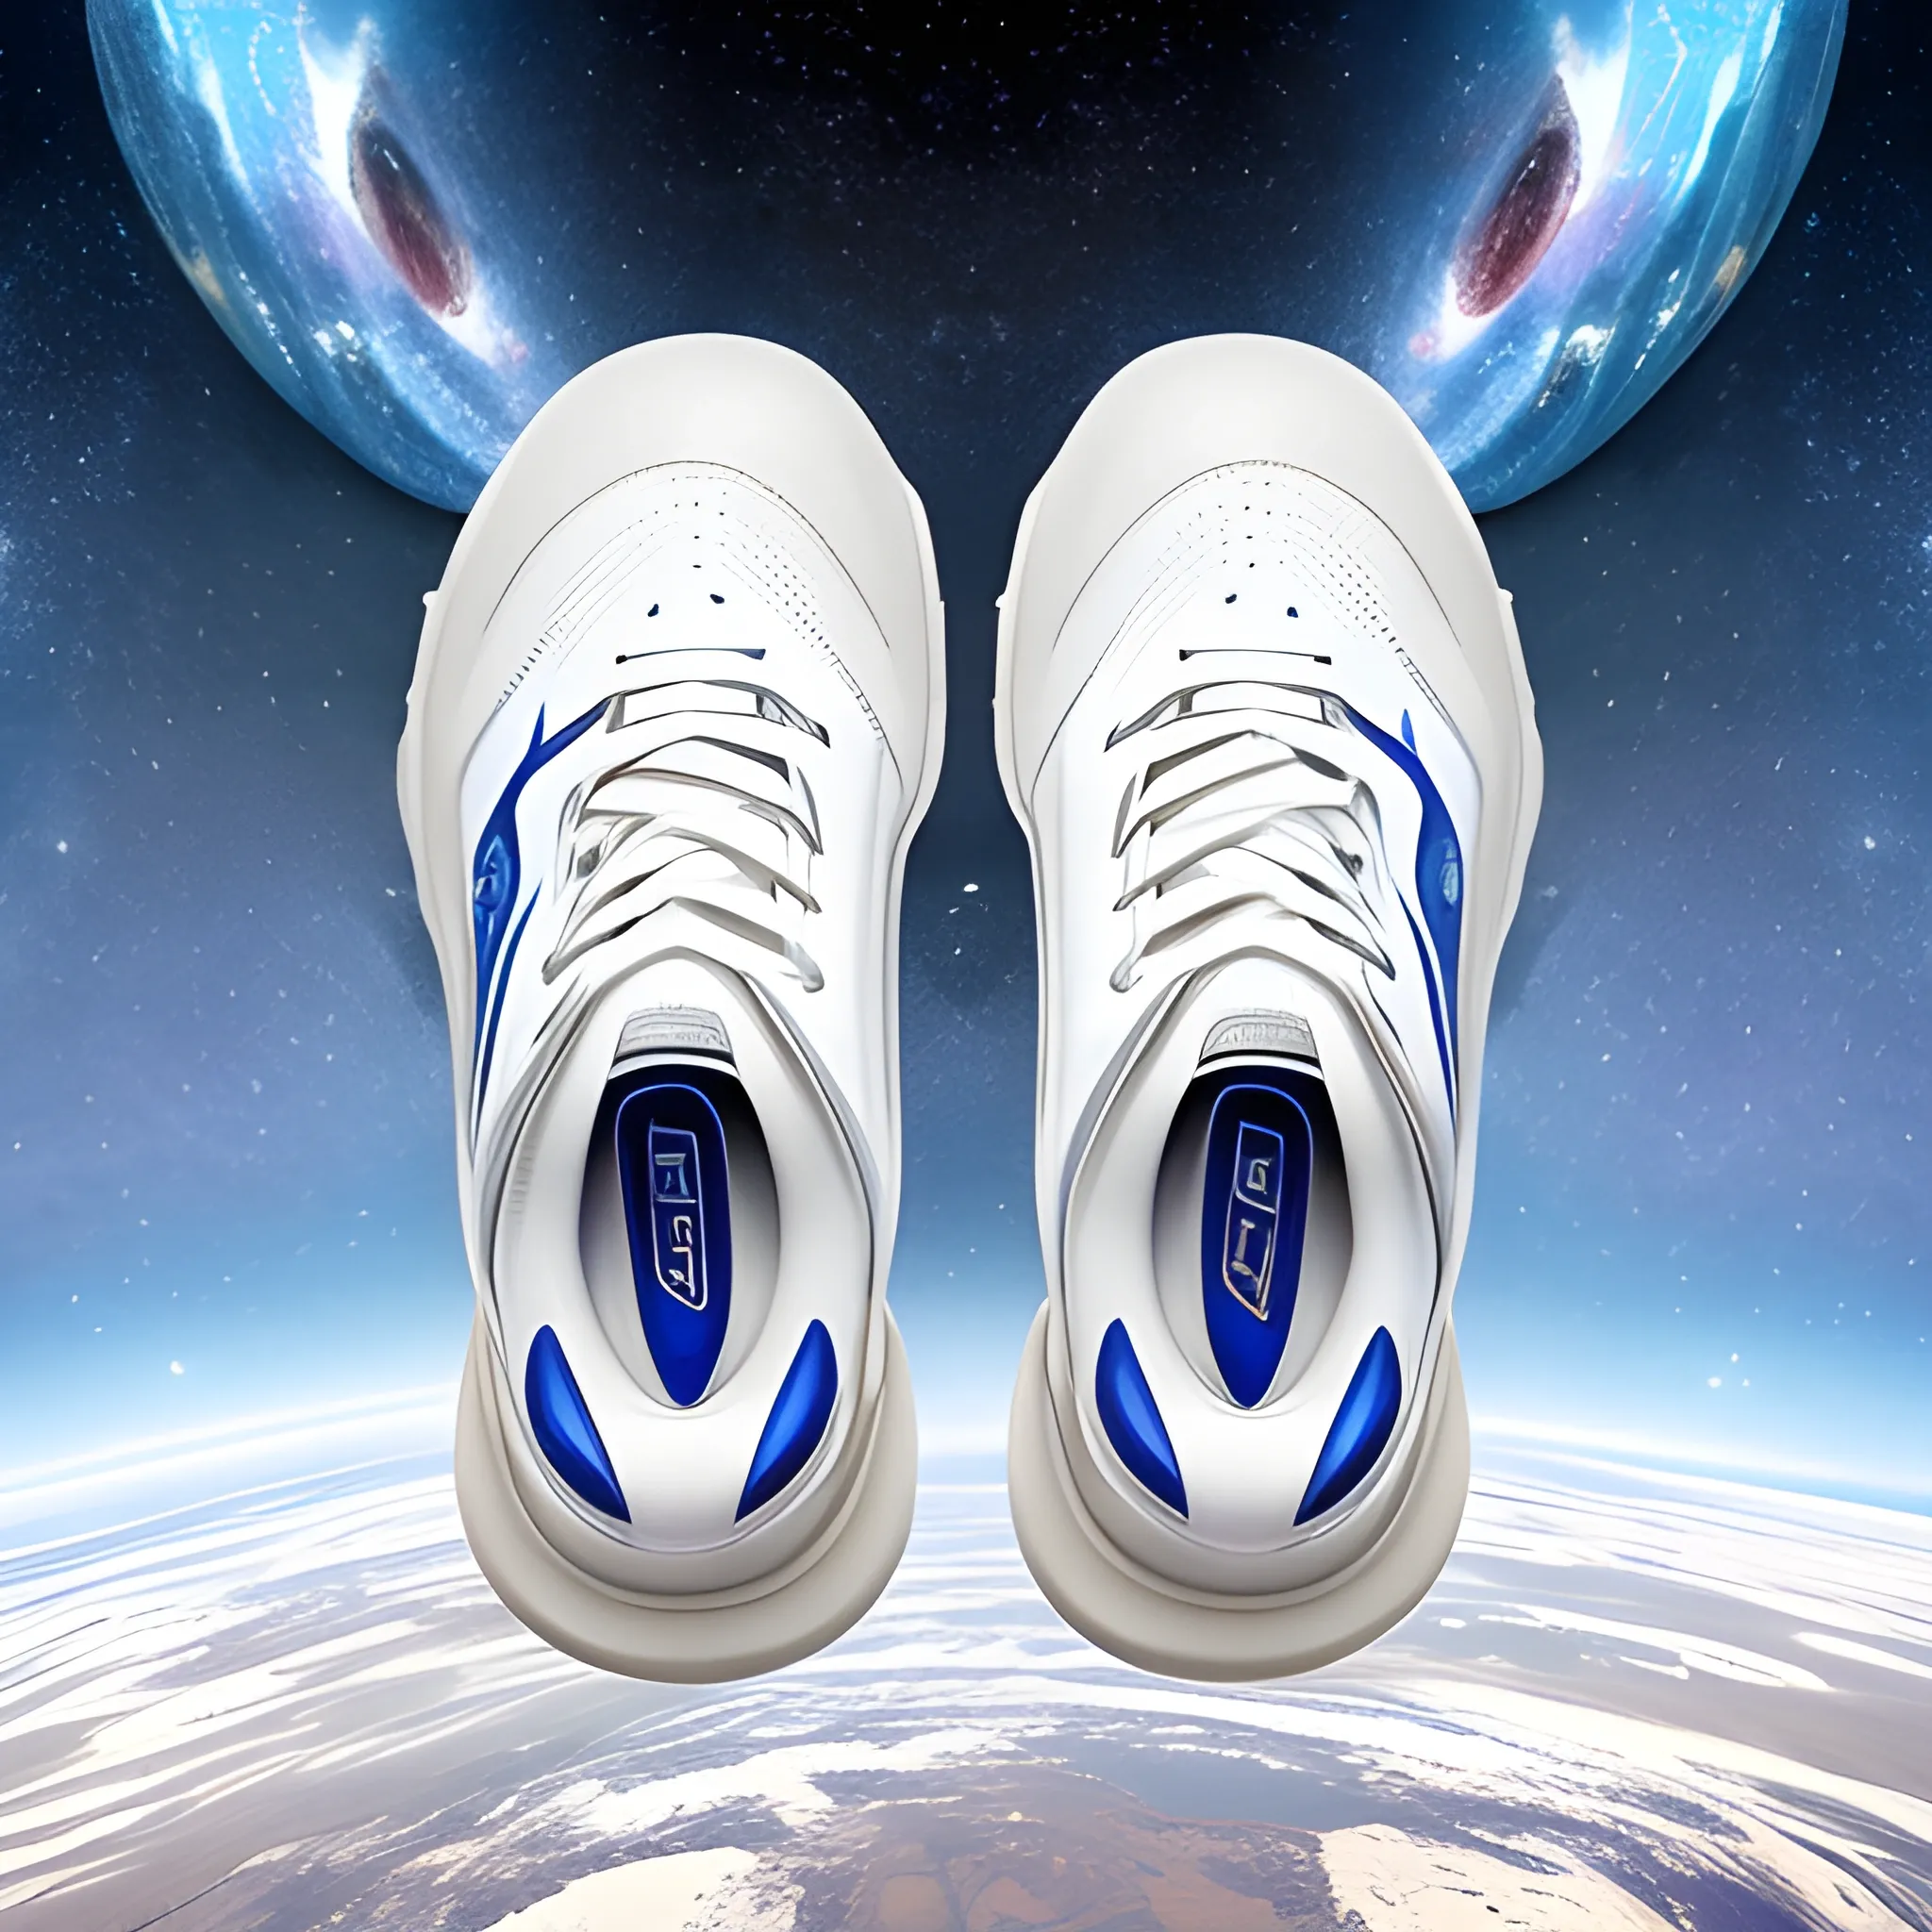 Surreal detailed low top space shoes product photo with first generation spacesuit elements, silkworm baby elements, fat feeling, full milky white design, pop in art station, smooth, whole shoe in painting, clear focus
